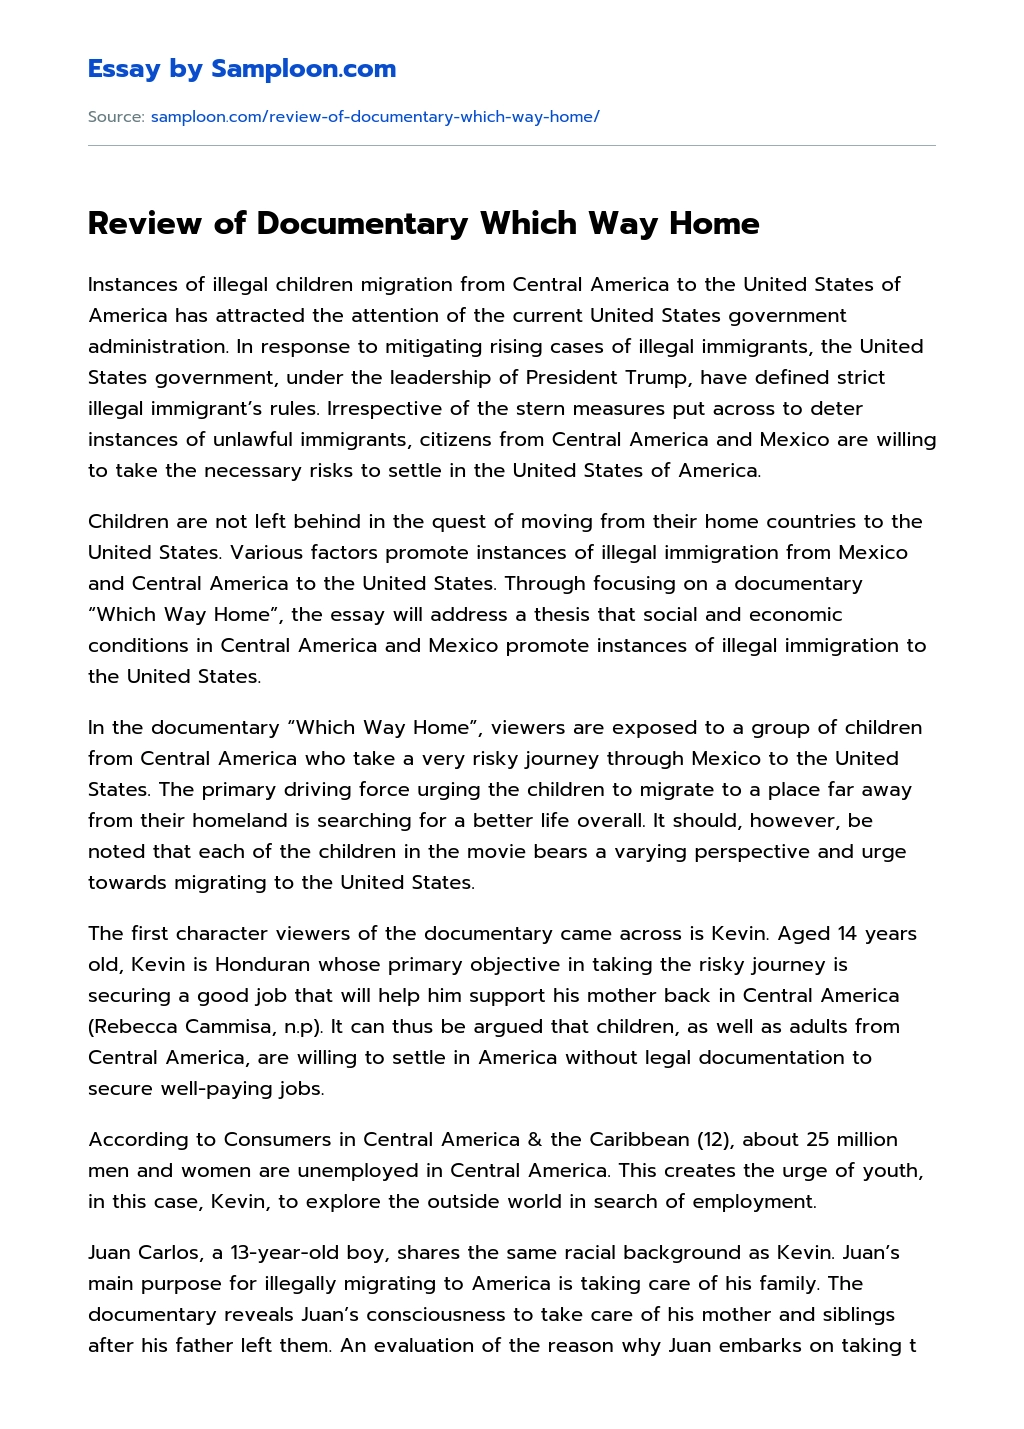 Review of Documentary Which Way Home essay